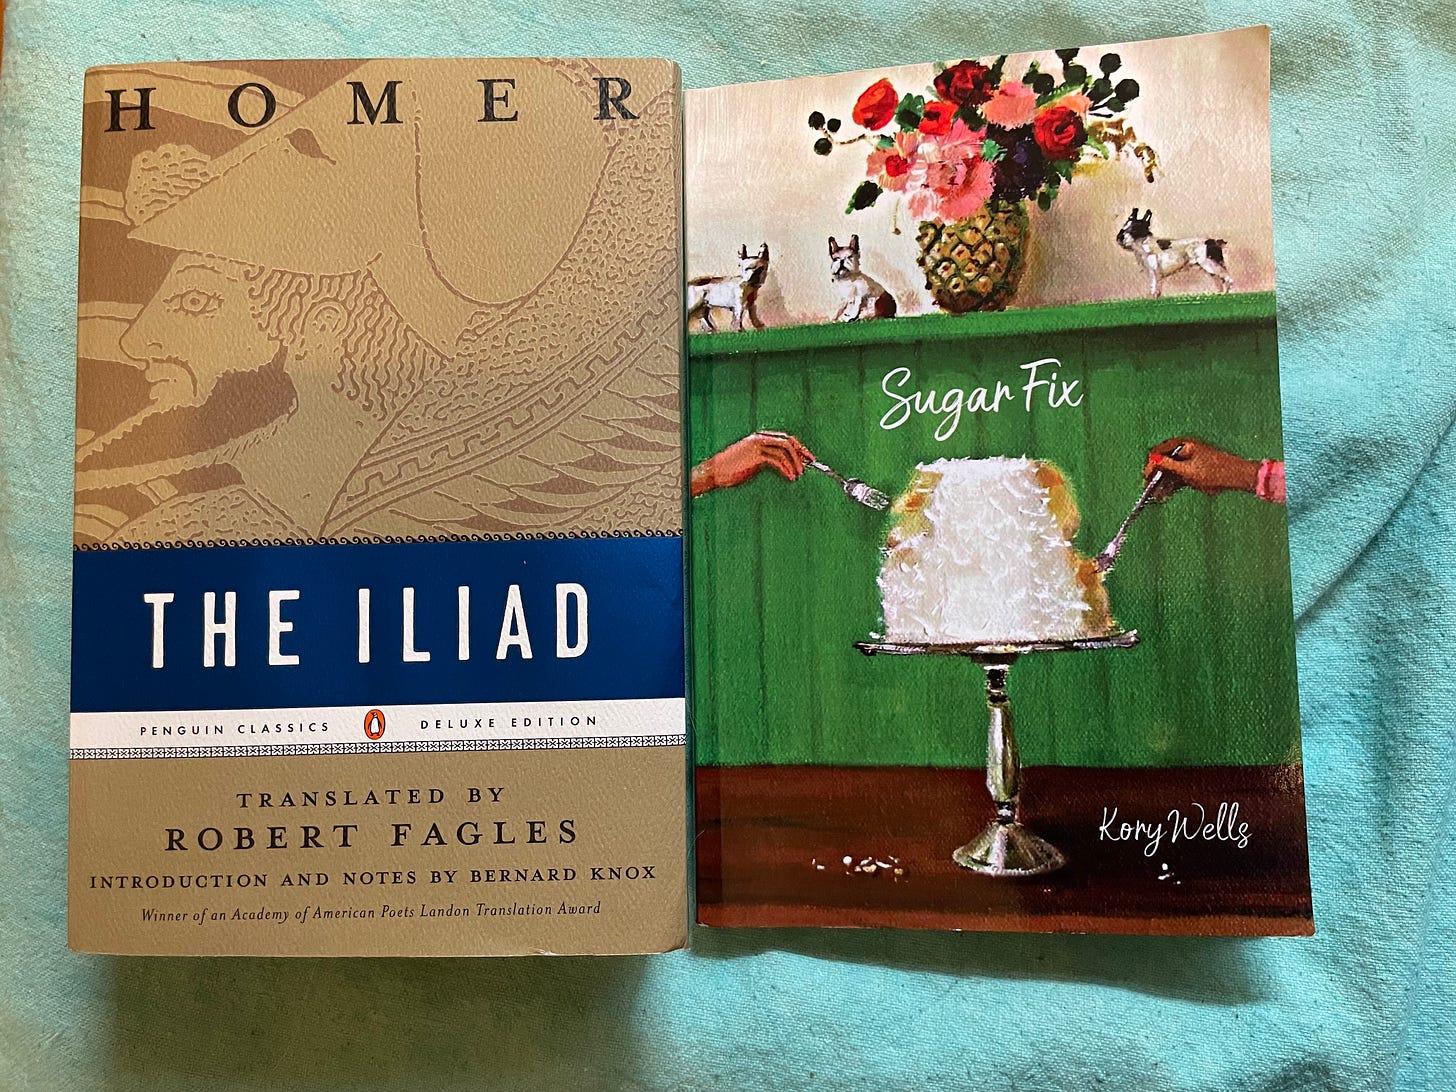 The Iliad by Homer (translated by Robert Fagles) and Sugar Fix by Kory Wells